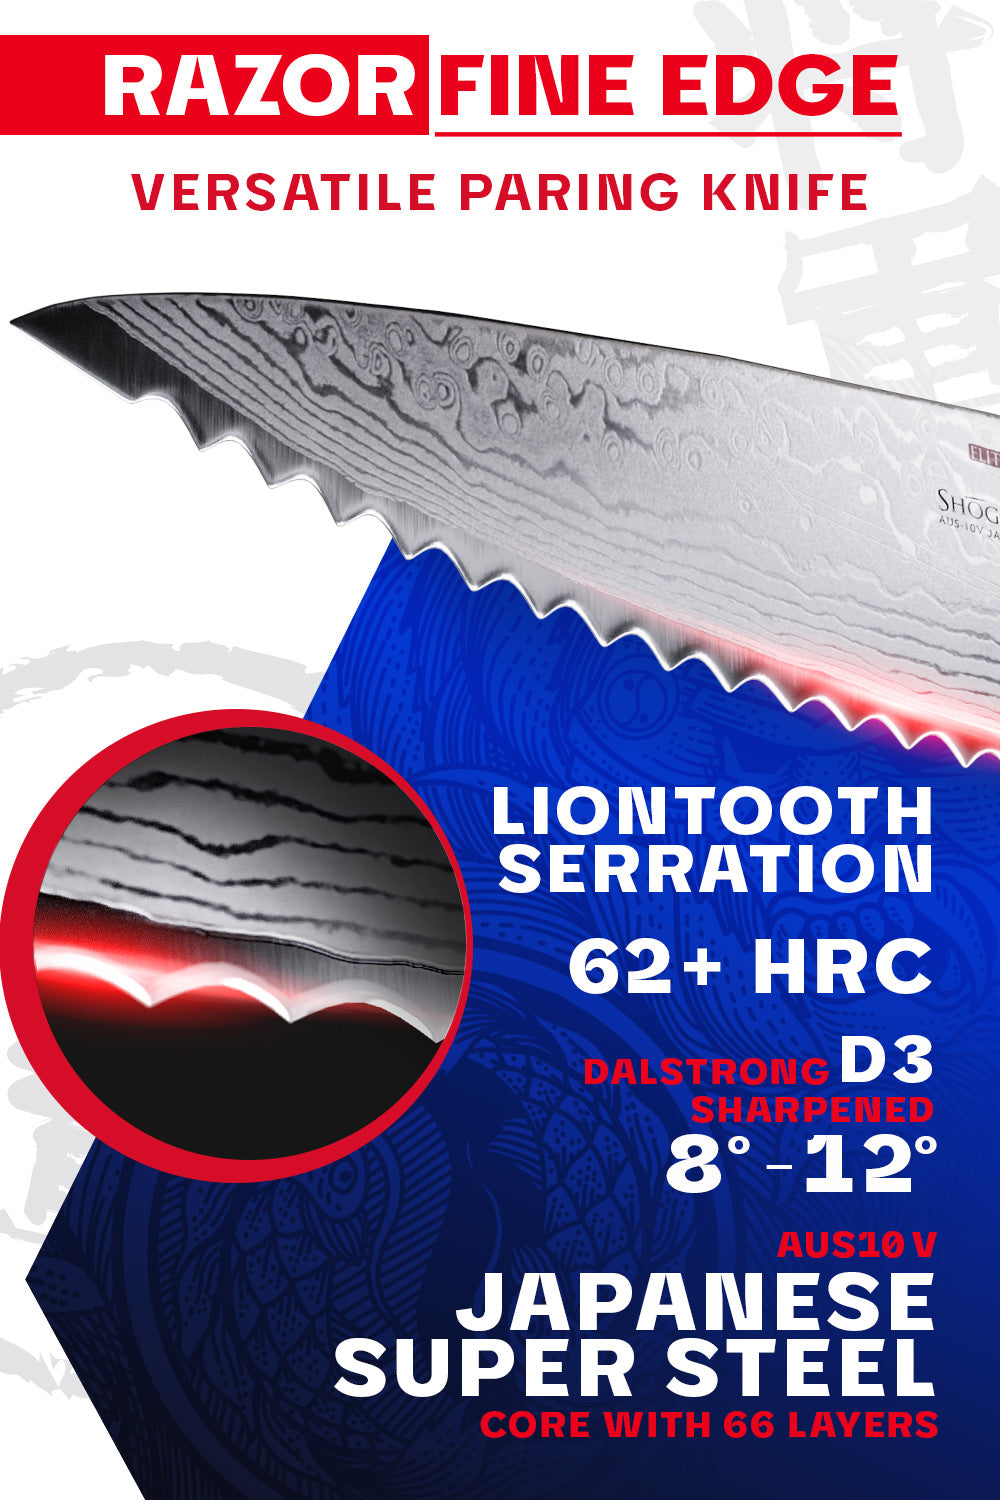 Dalstrong shogun series 3.5 inch serrated paring knife sharpness and blade specification.